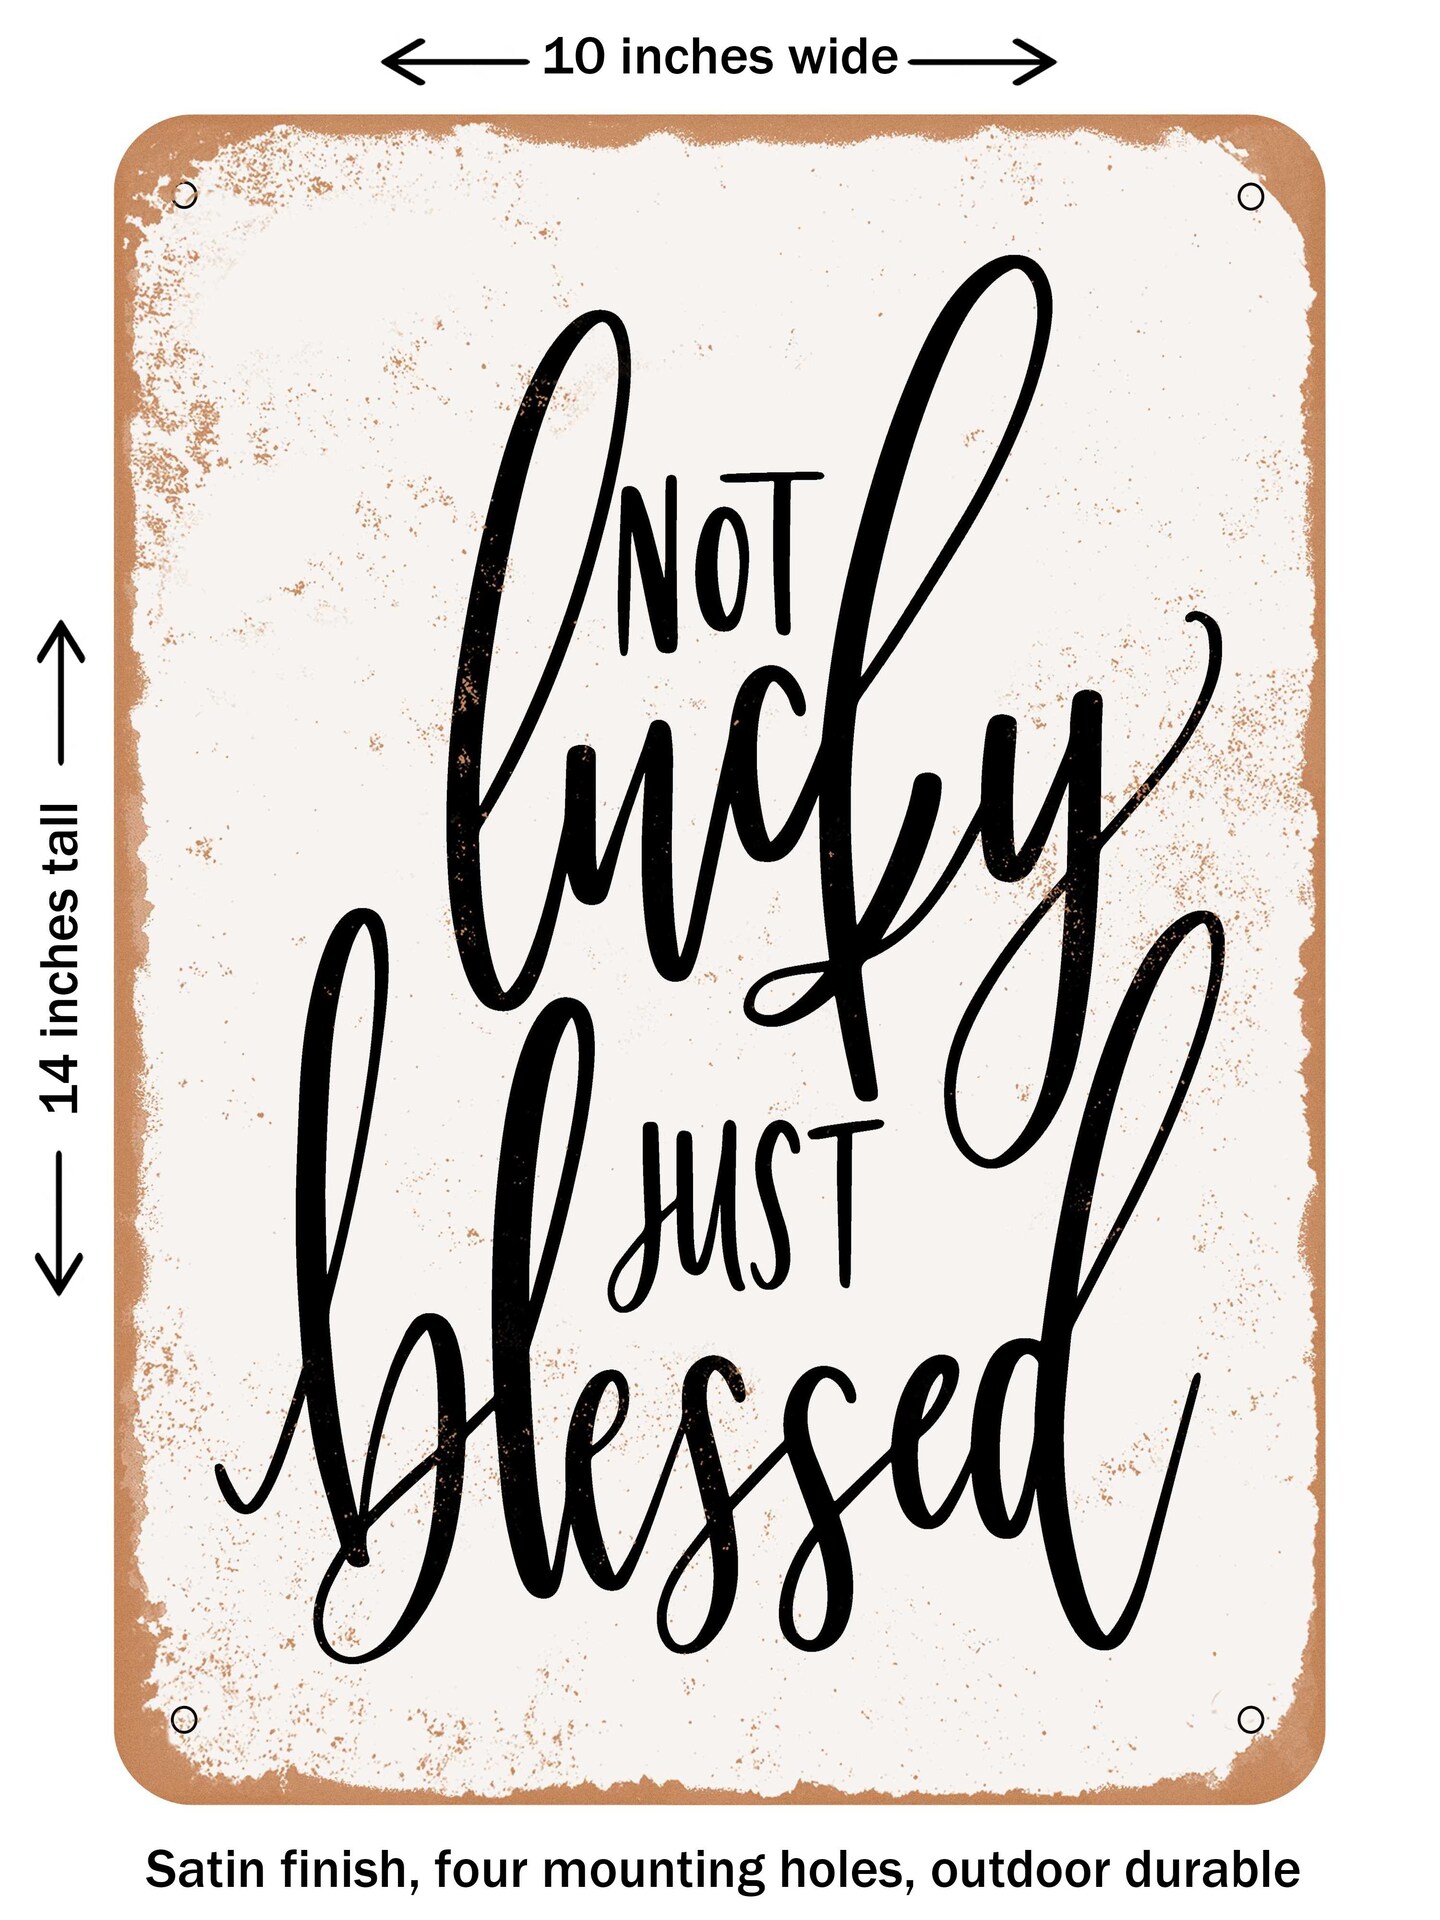 DECORATIVE METAL SIGN - Not lucky just blessed  - Vintage Rusty Look